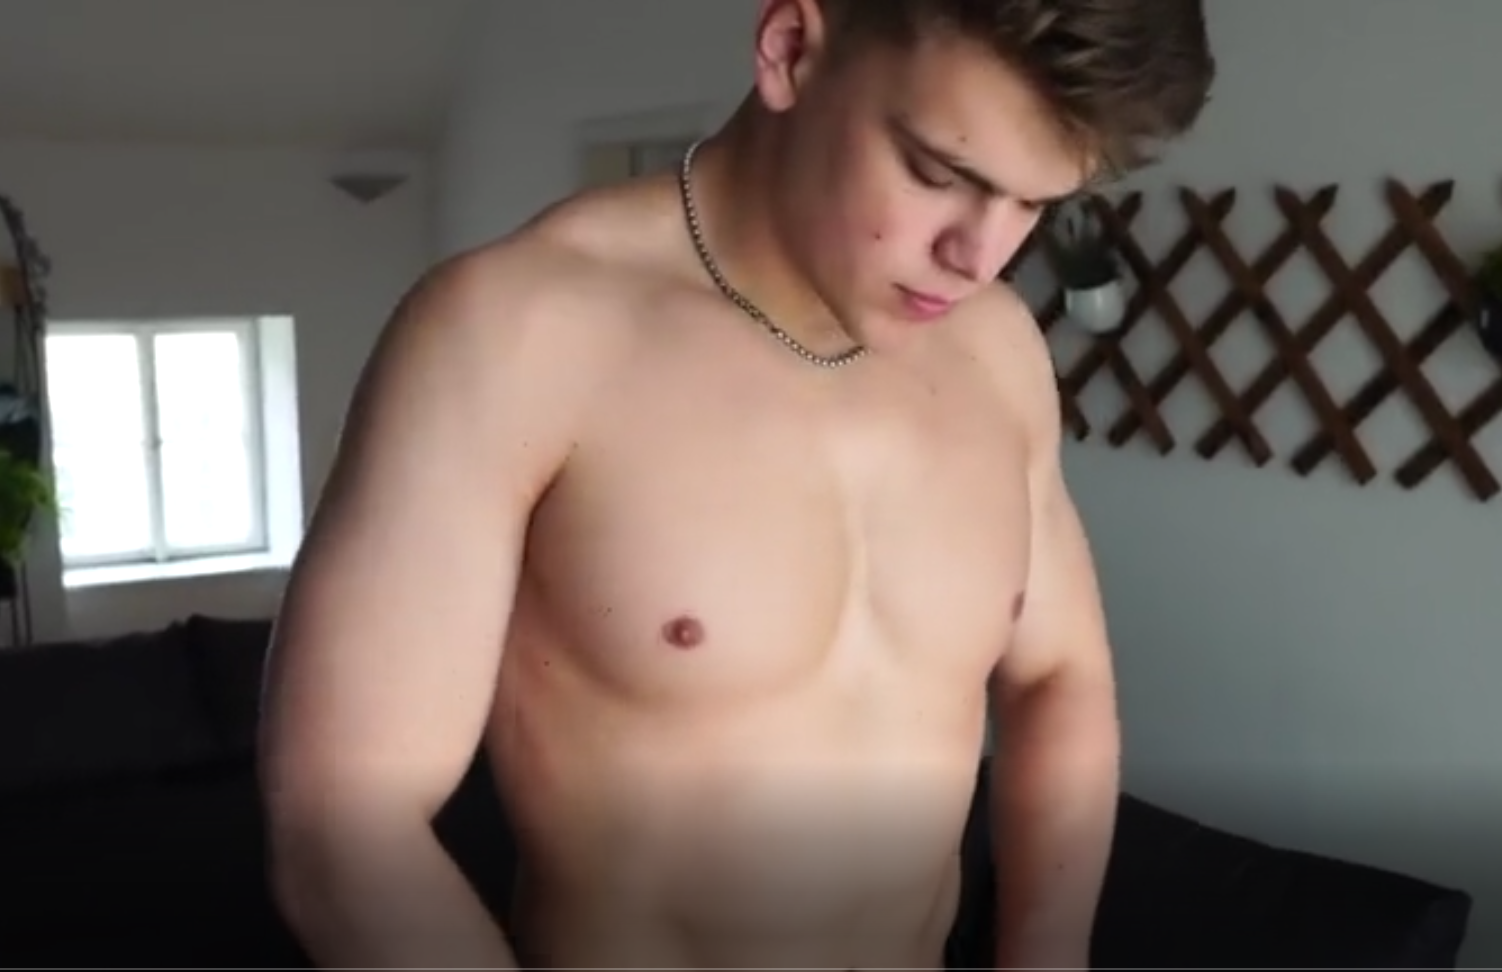 1502px x 972px - Young Twink With A Big Bubble Butt Gets Spanked And Cry - ThisVid.com